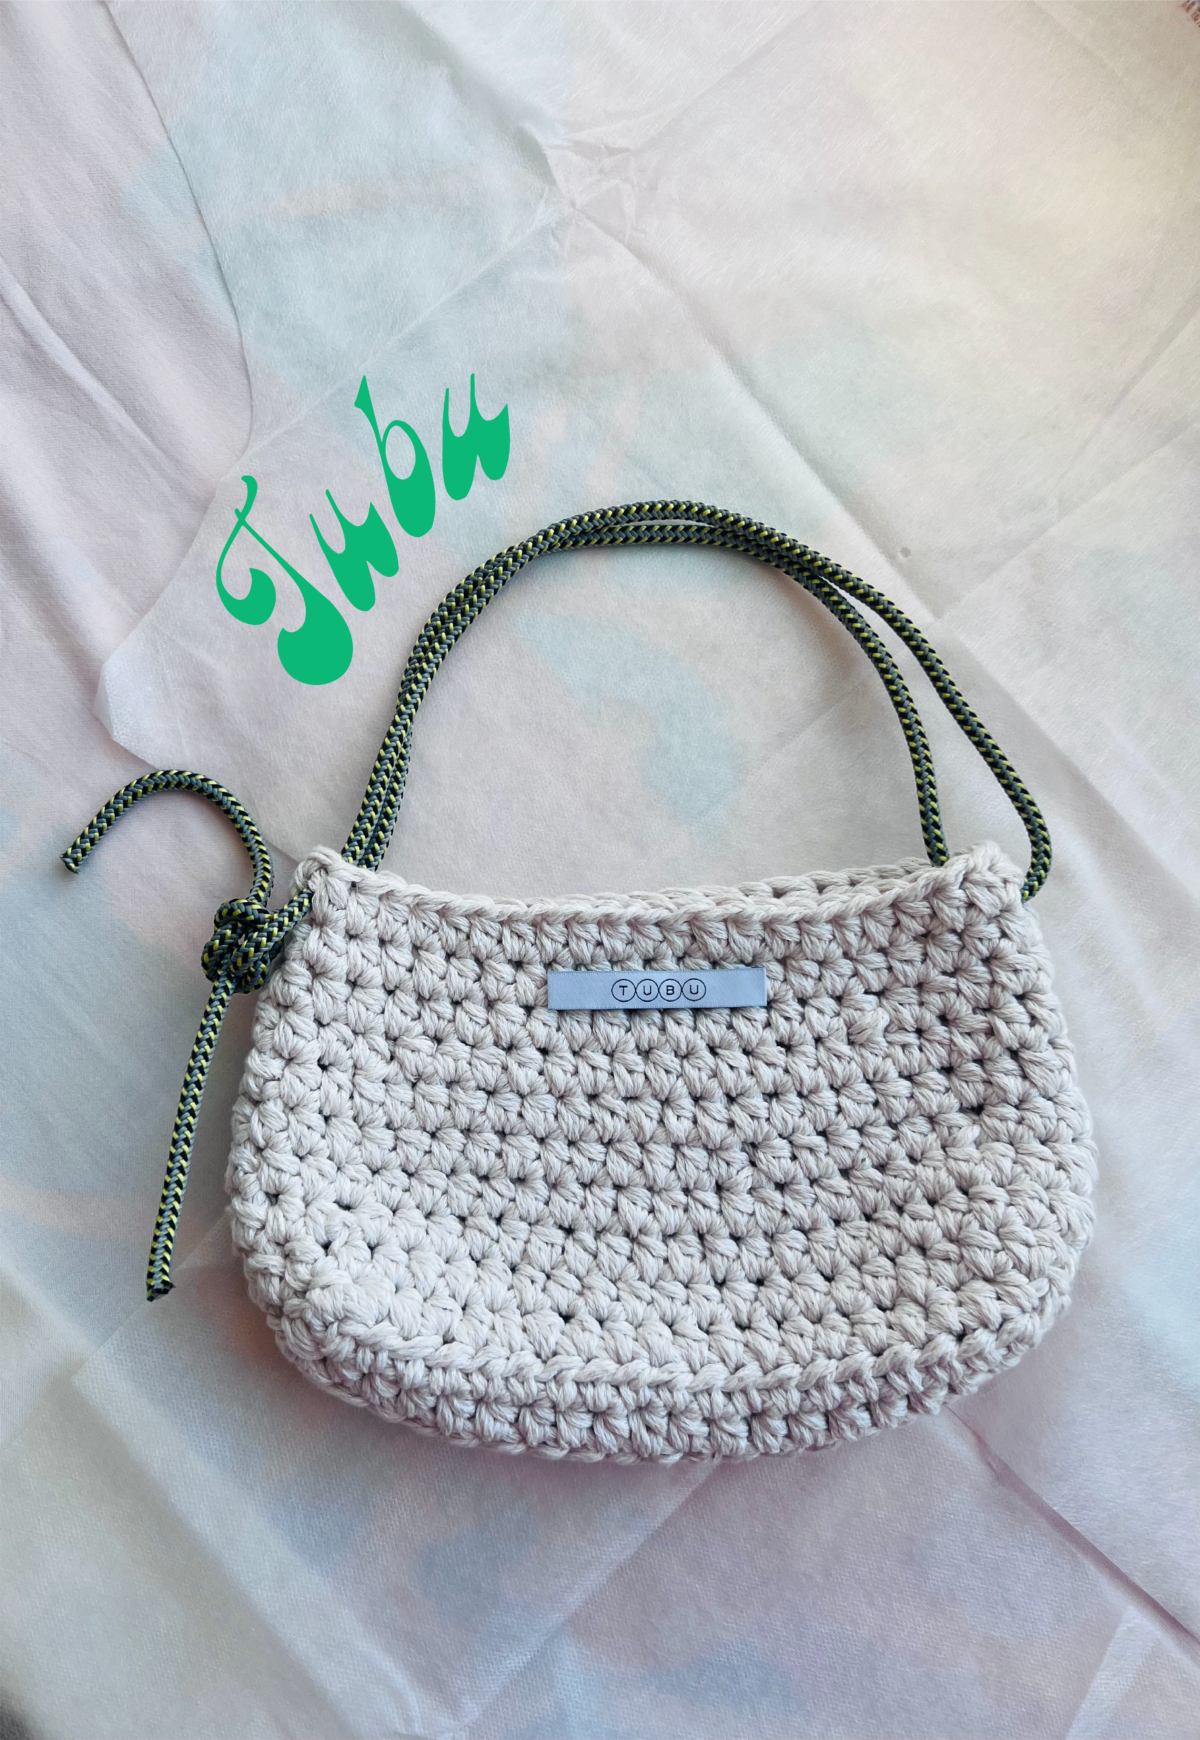 Small white crocheted bag with a climbing rope as handle.